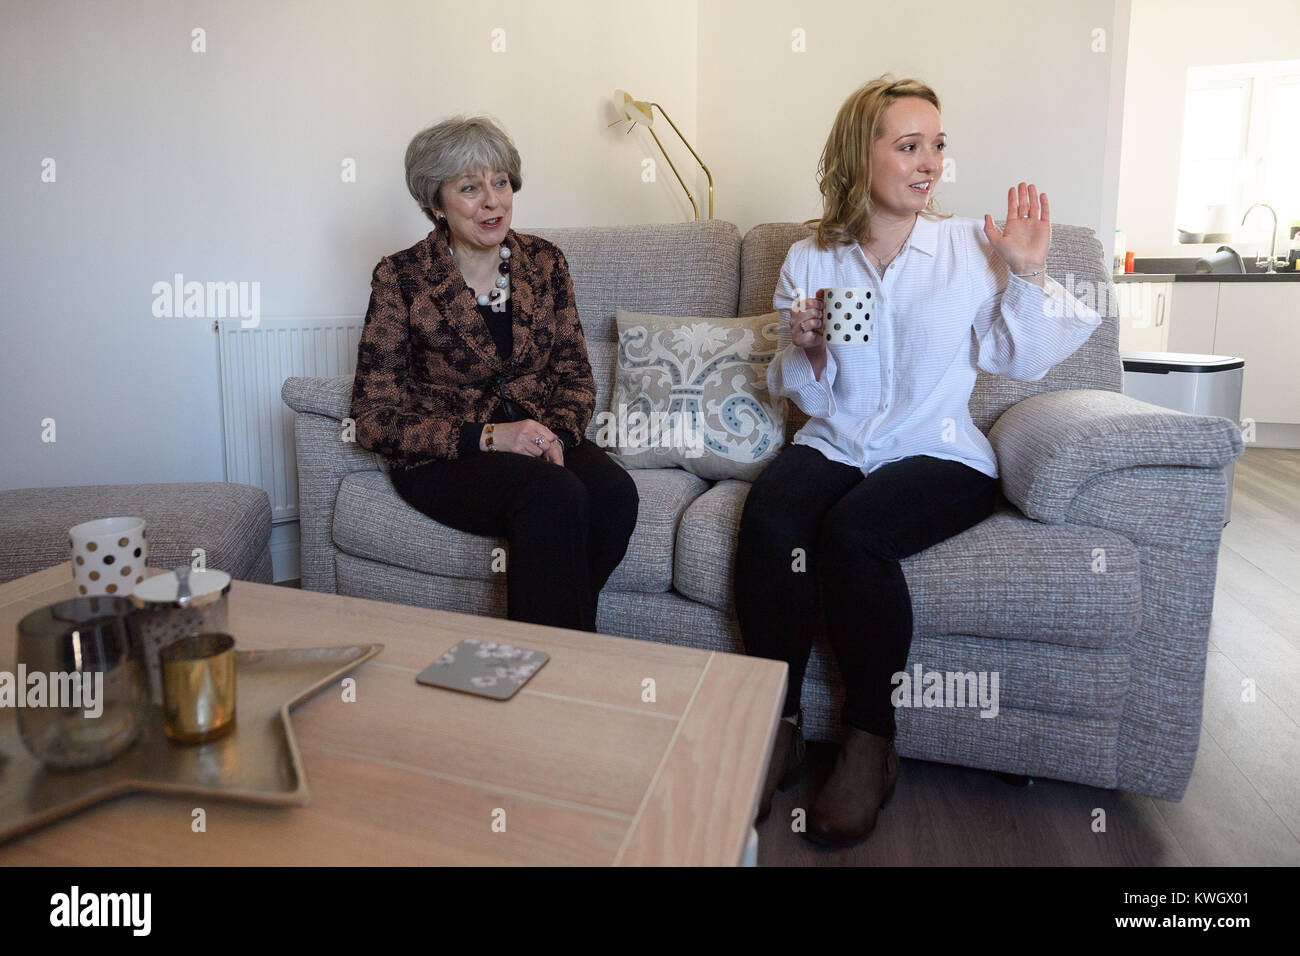 Prime Minister Theresa May (left) chats with first-time buyer Laura Paine during a visit to new housing development Montague Park in Wokingham, Berkshire. Stock Photo